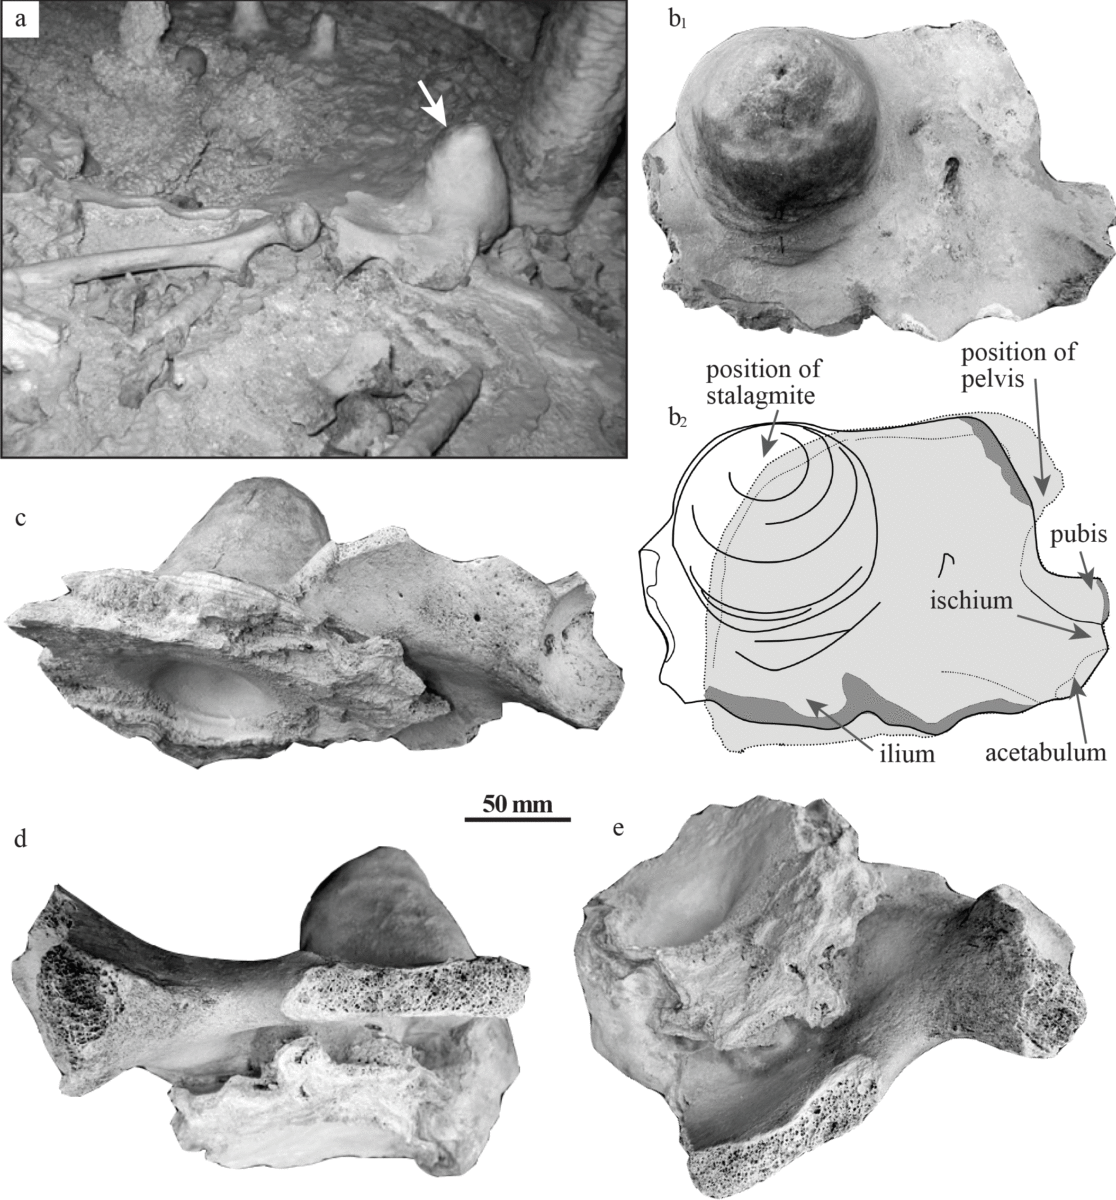 The Chan Hol II pelvis.
Different views of the Chan Hol II pelvis within the CH-7 stalagmite. Arrow in Fig 3A points to the CH-7 stalagmite prior to the robbery of the skeleton. Note that the pelvis was then articulated to the right femur. Extraction of collagen and thus 14C age determination failed on the bones of the Chan Hol II individual due to the complete dissolution of organic matter, specifically collagen. Photo Credit: PLOS ONE.